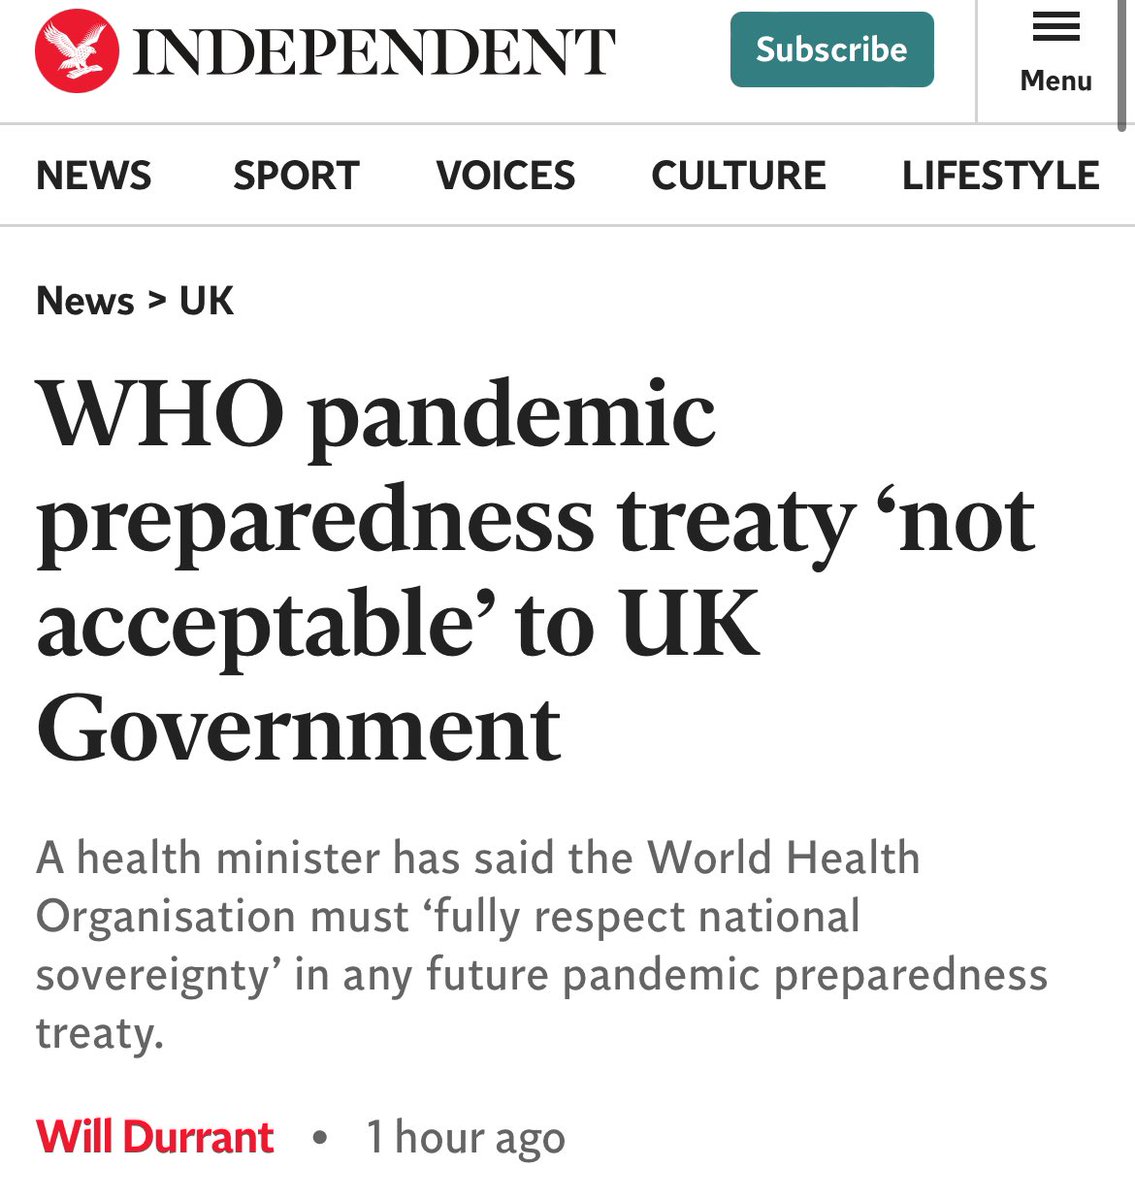 Very good news, as the UK announces they will NOT be signing the WHO Pandemic Treaty until such time the treaty fully respects national sovereignty 🙌🏼 Do you think Trudeau & team would protect Canadians 🇨🇦 the same way?